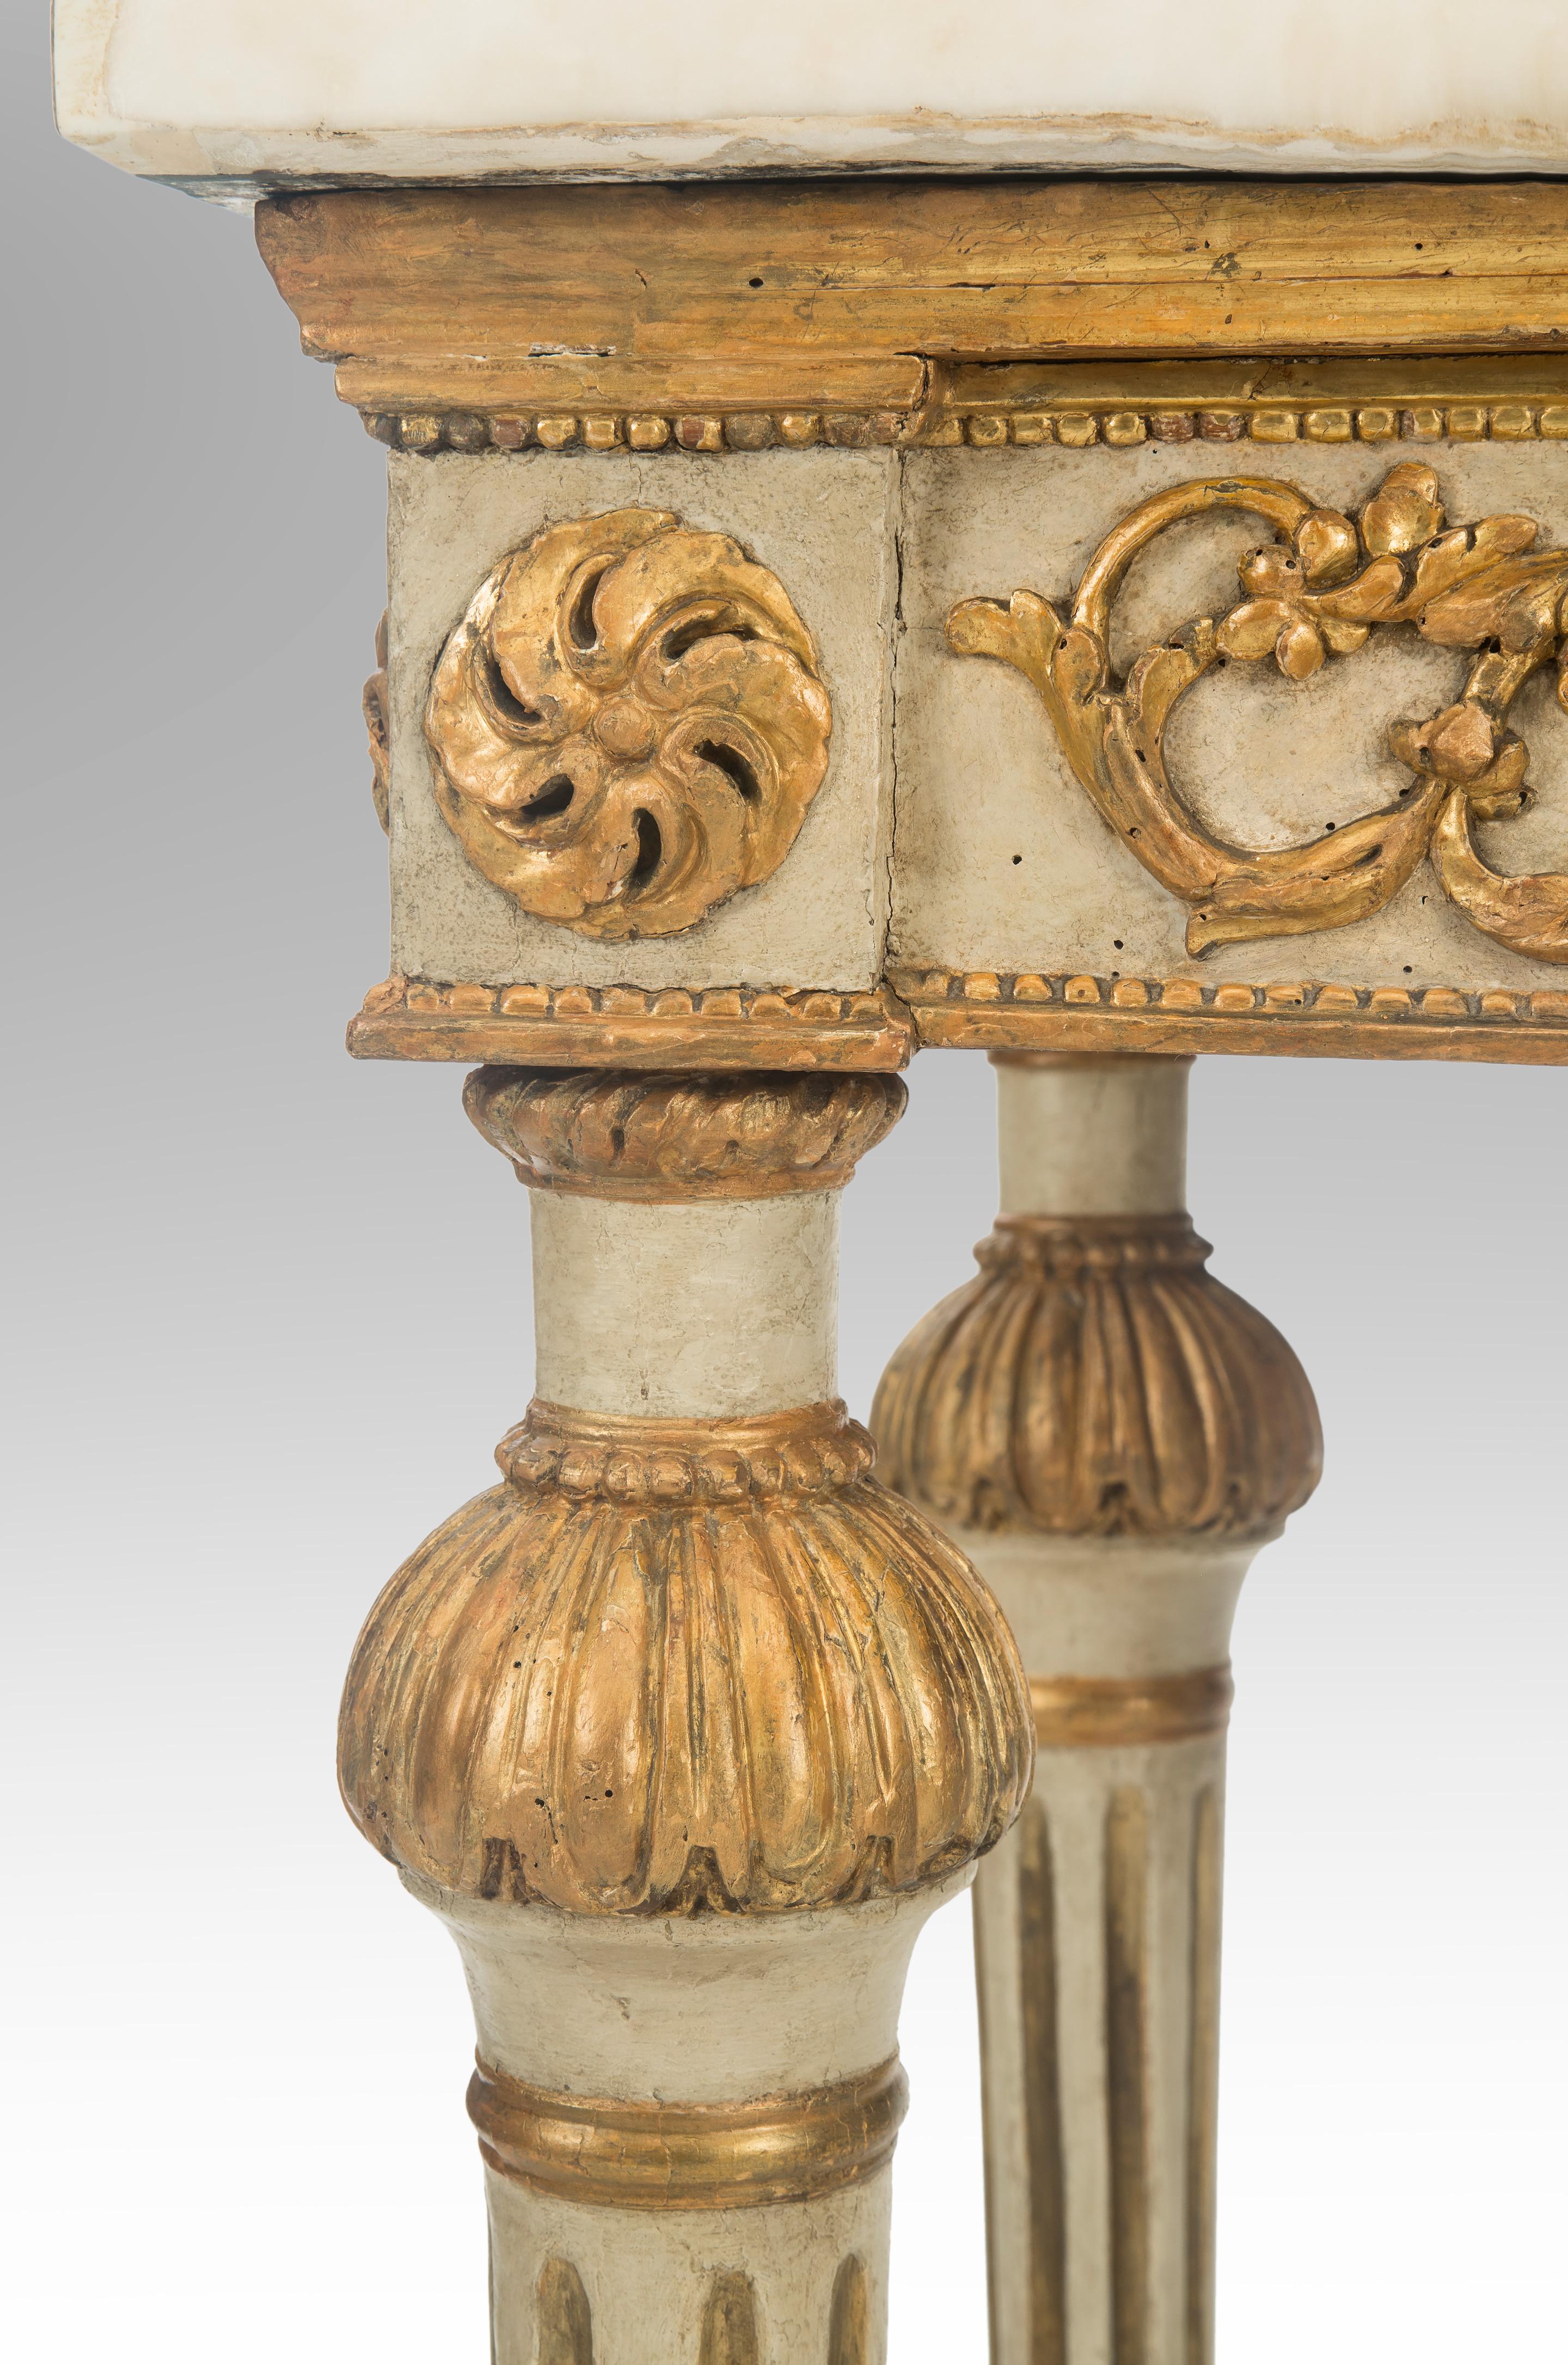 Italian neoclassical painted and parcel-gilt console table
Late 18th century
A handsome neoclassical-period console table with lively carvings. The beautiful Siena marble top with a Carrara marble border, above an apron centered by a laurel wreath